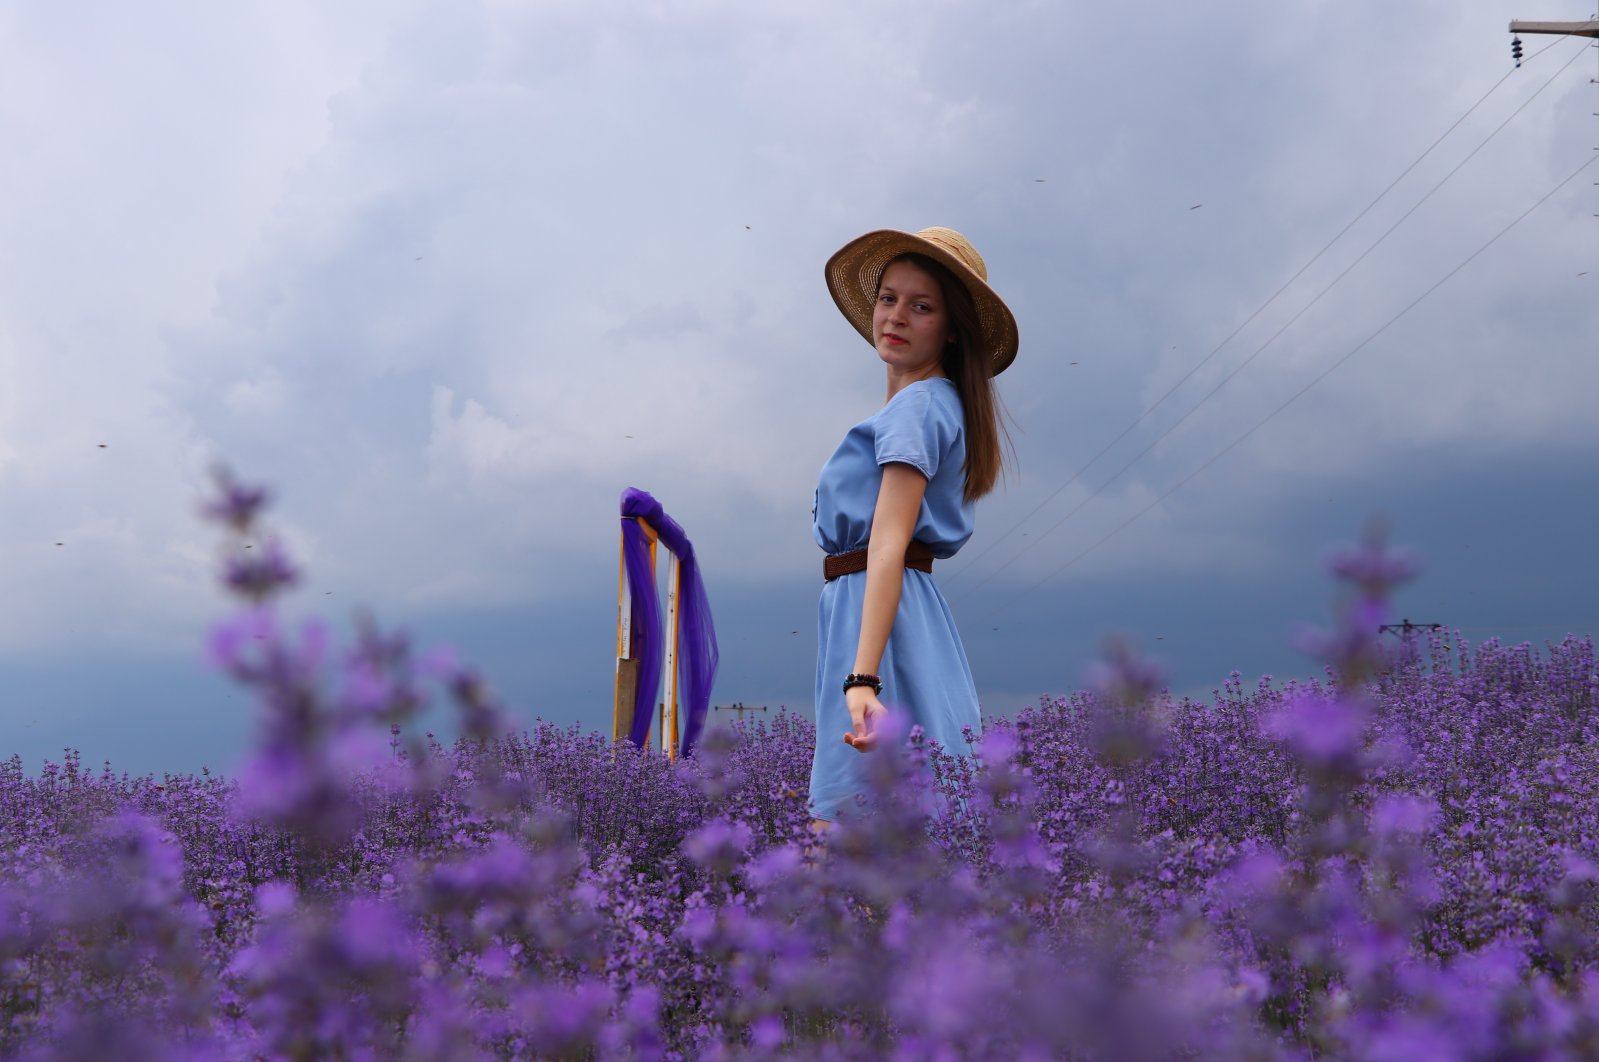 Lavender fields have proven popular spots in recent years for impromptu photo ops. (AA Photo)